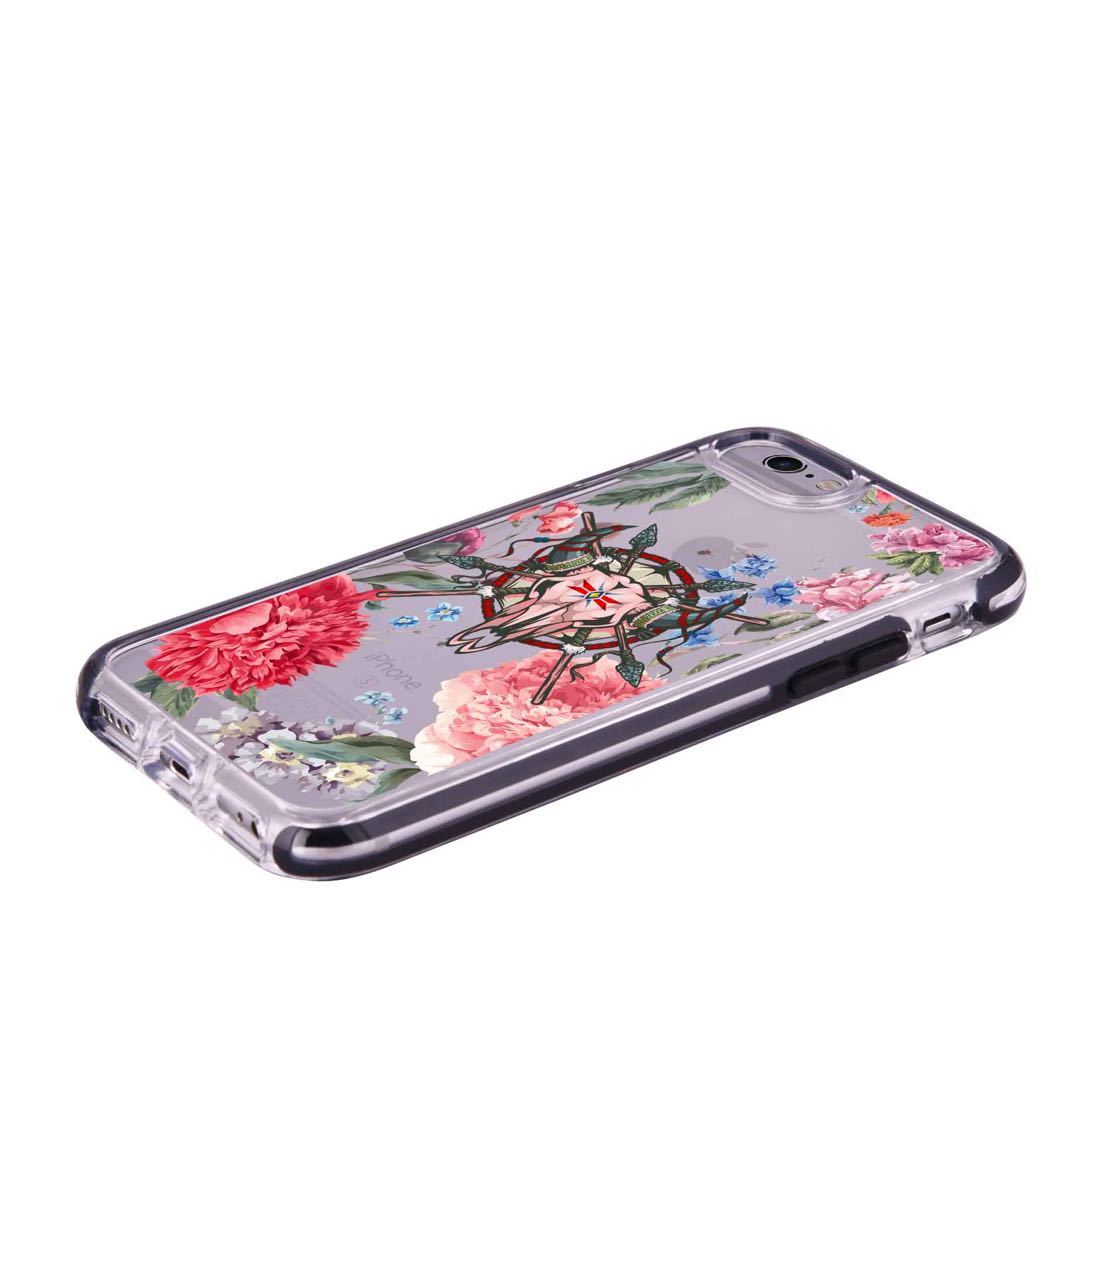 Floral Symmetry - Extreme Phone Case for iPhone 6 Plus